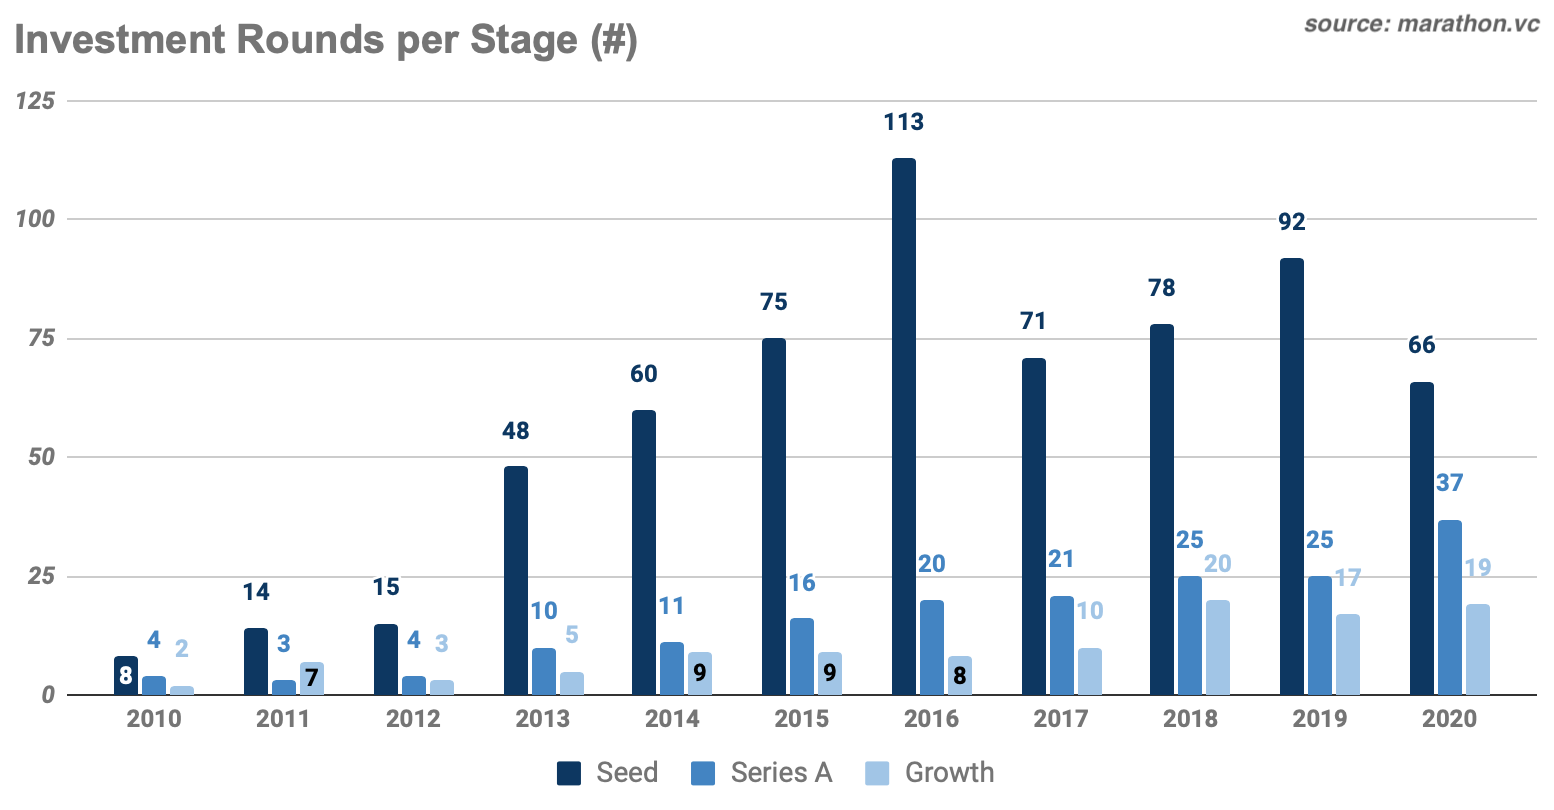 Investment rounds per stage